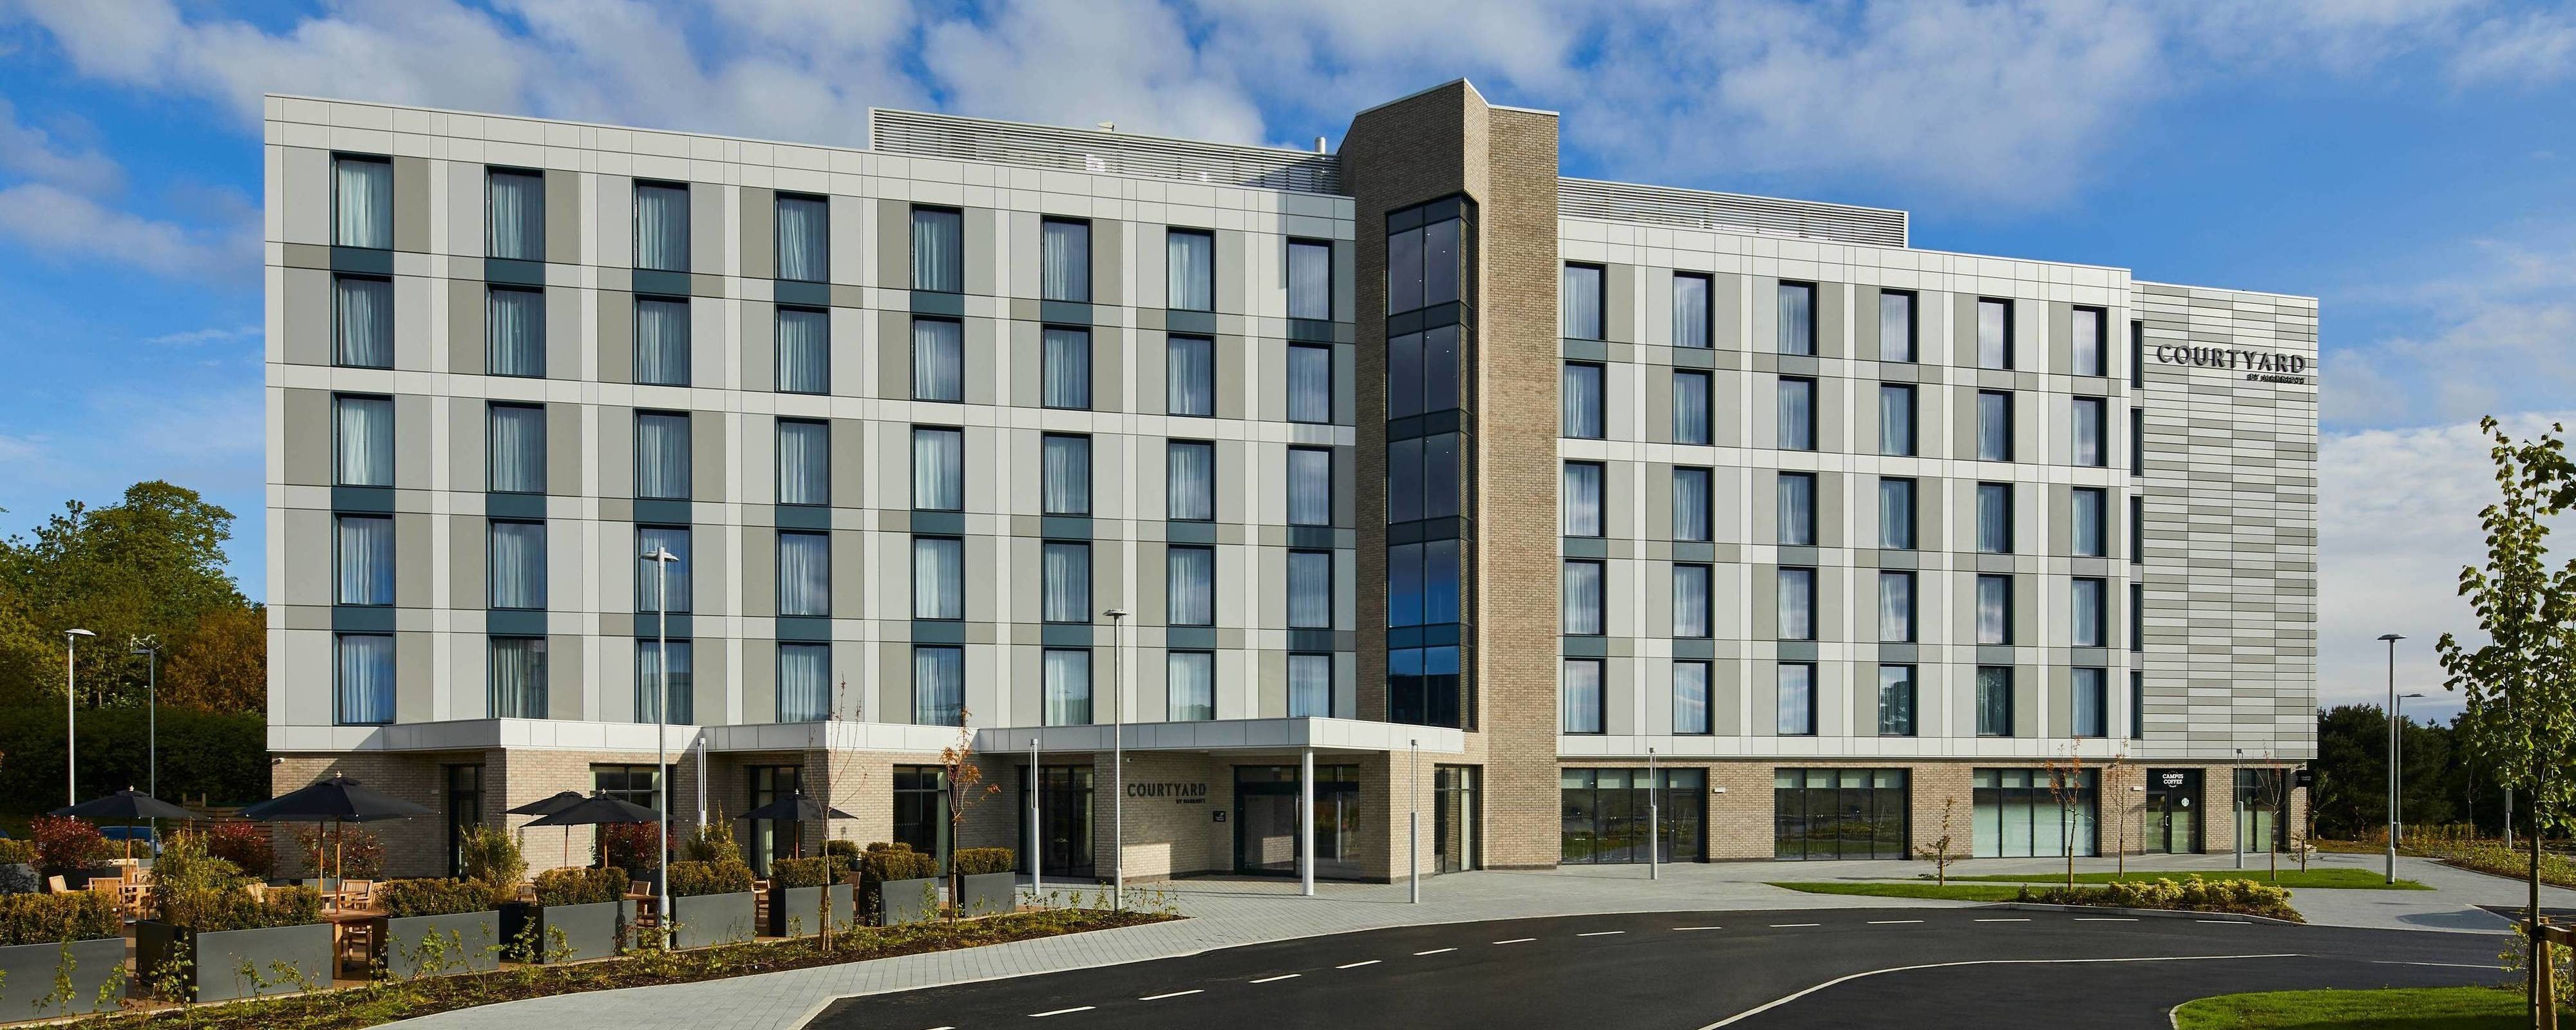 Image for Courtyard Keele Staffordshire, a Marriott hotel.